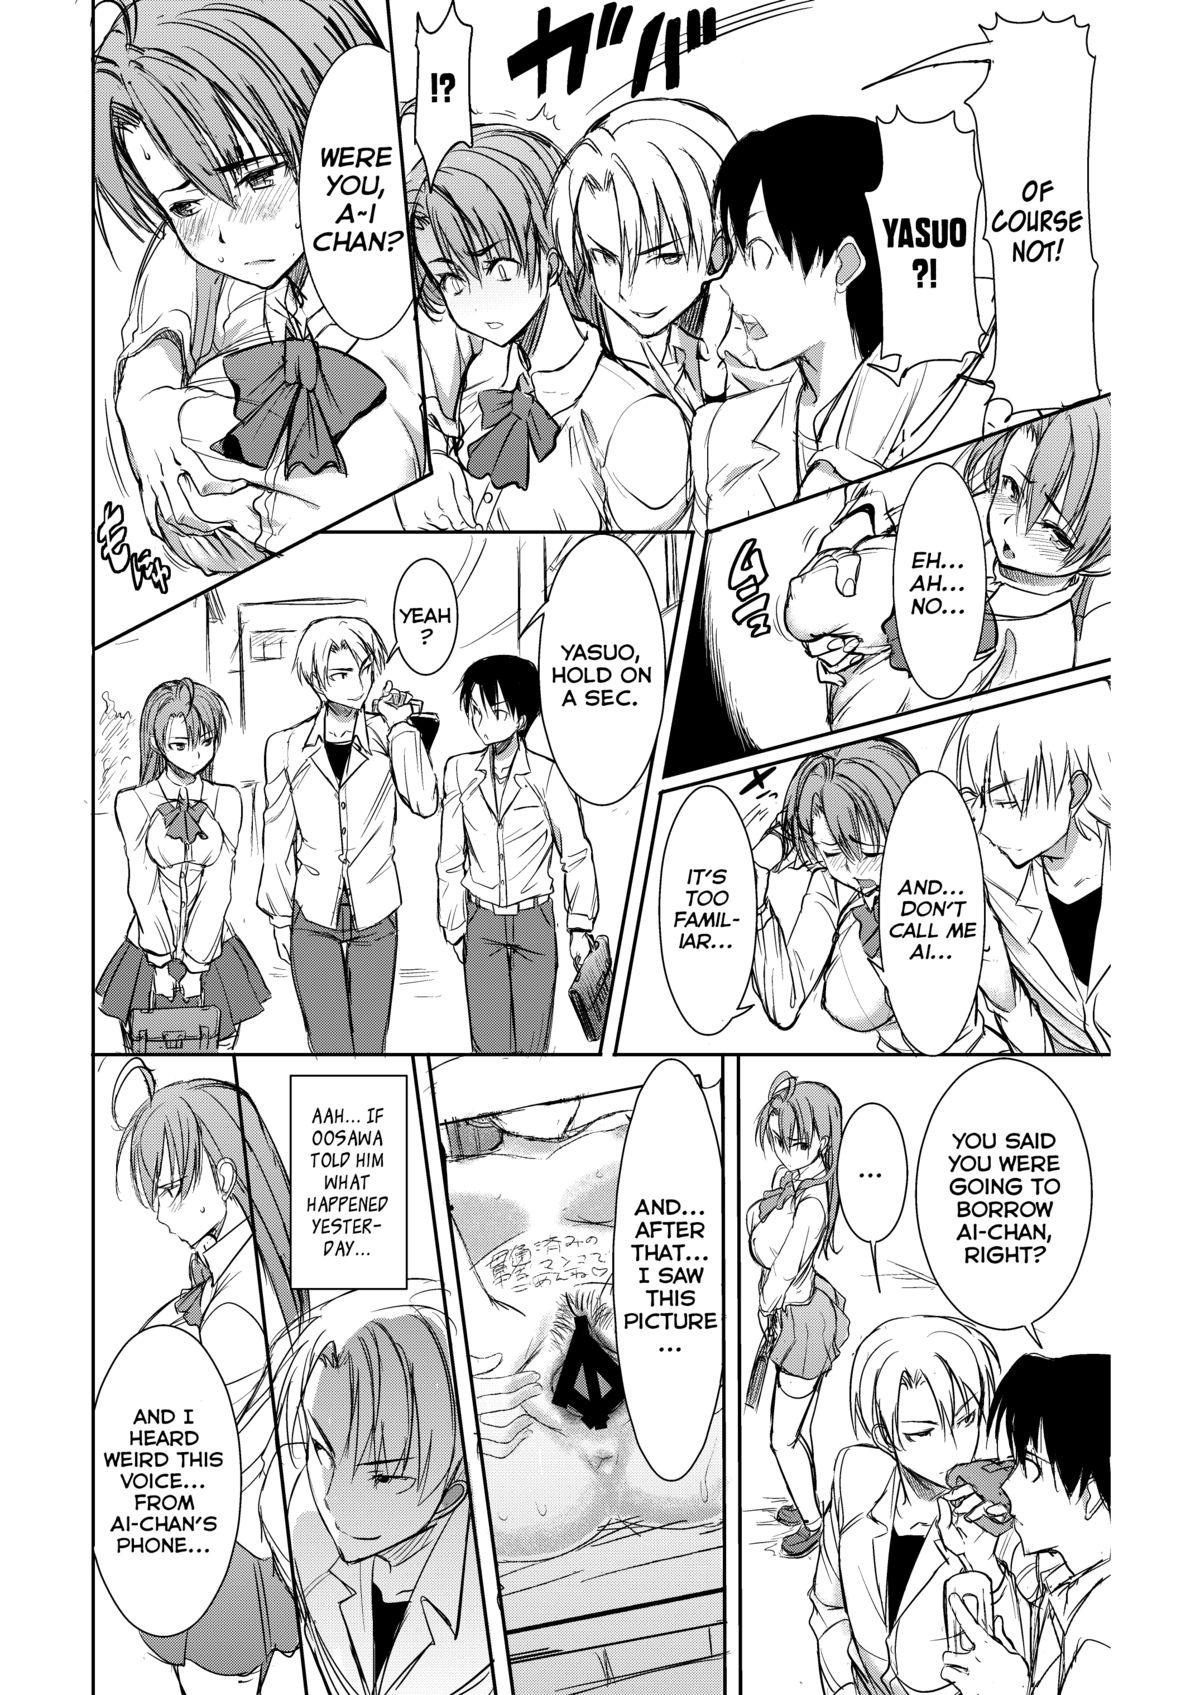 [Tanaka Aji] UnSweet Inoue Ai + (Plus) 2 Tainted by the guy I hate...  I have to hate it... Digital ver. vol.2 [English] 6